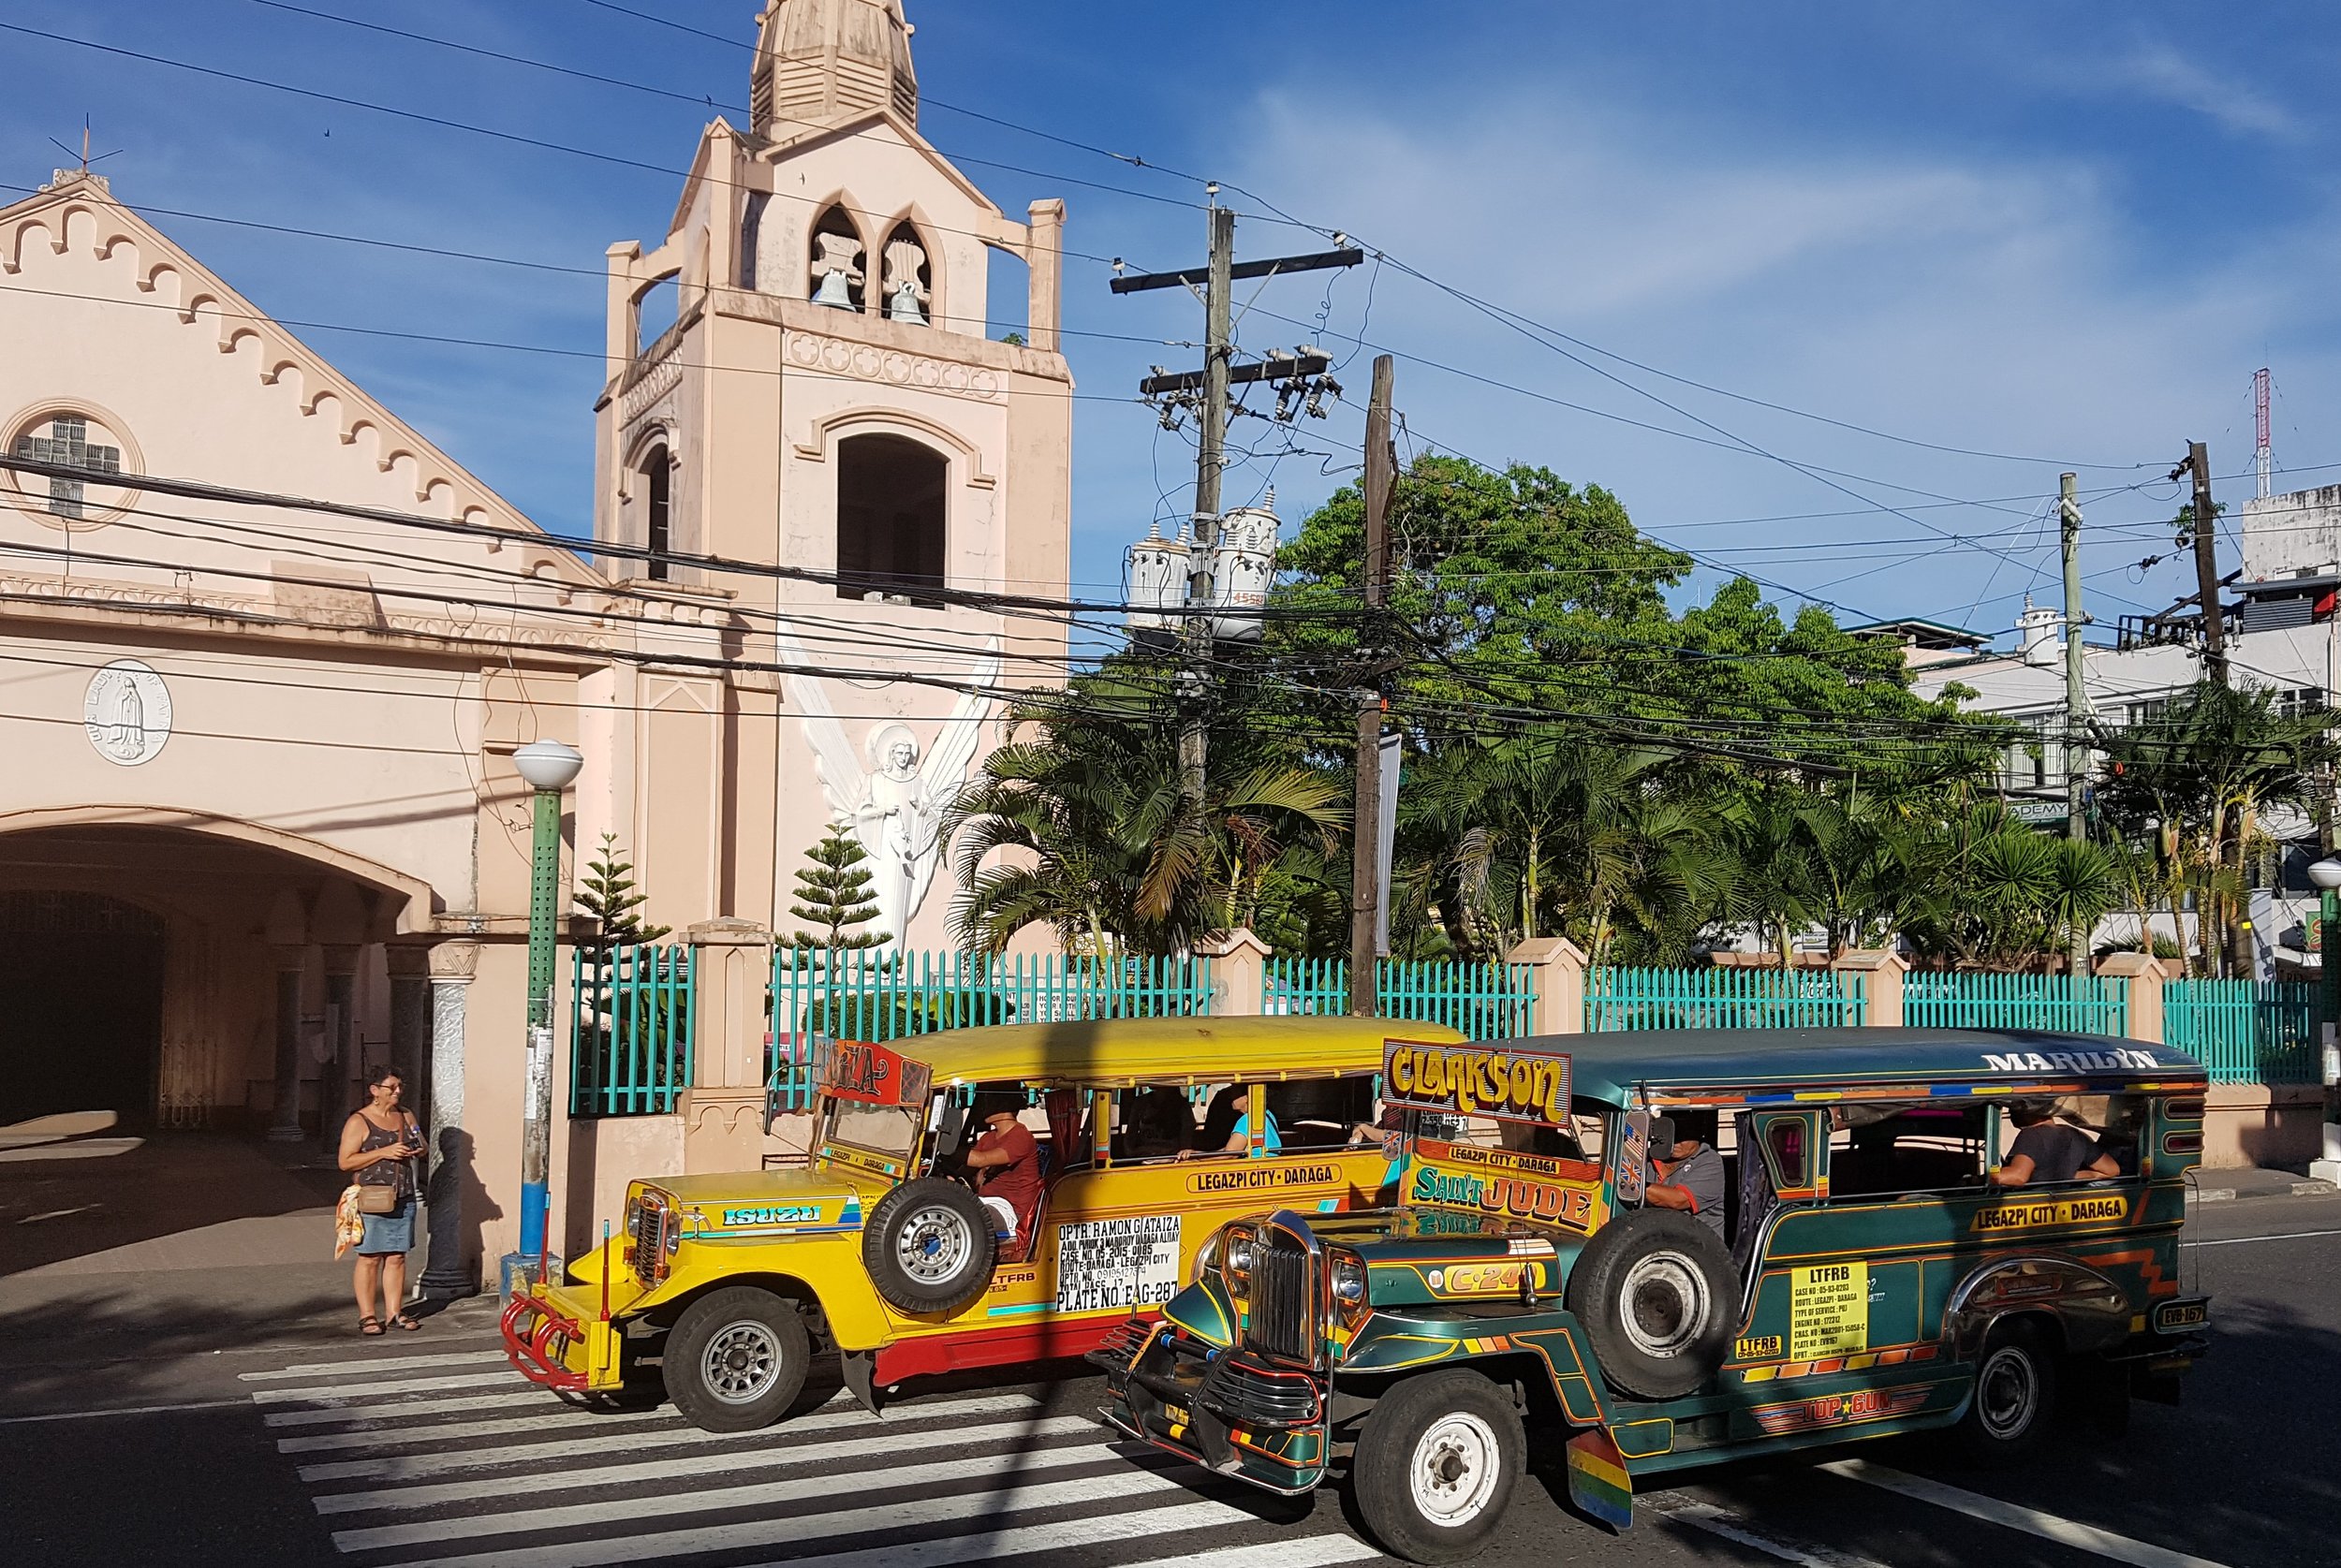 The colorful Jeepneys are an important means of transportation